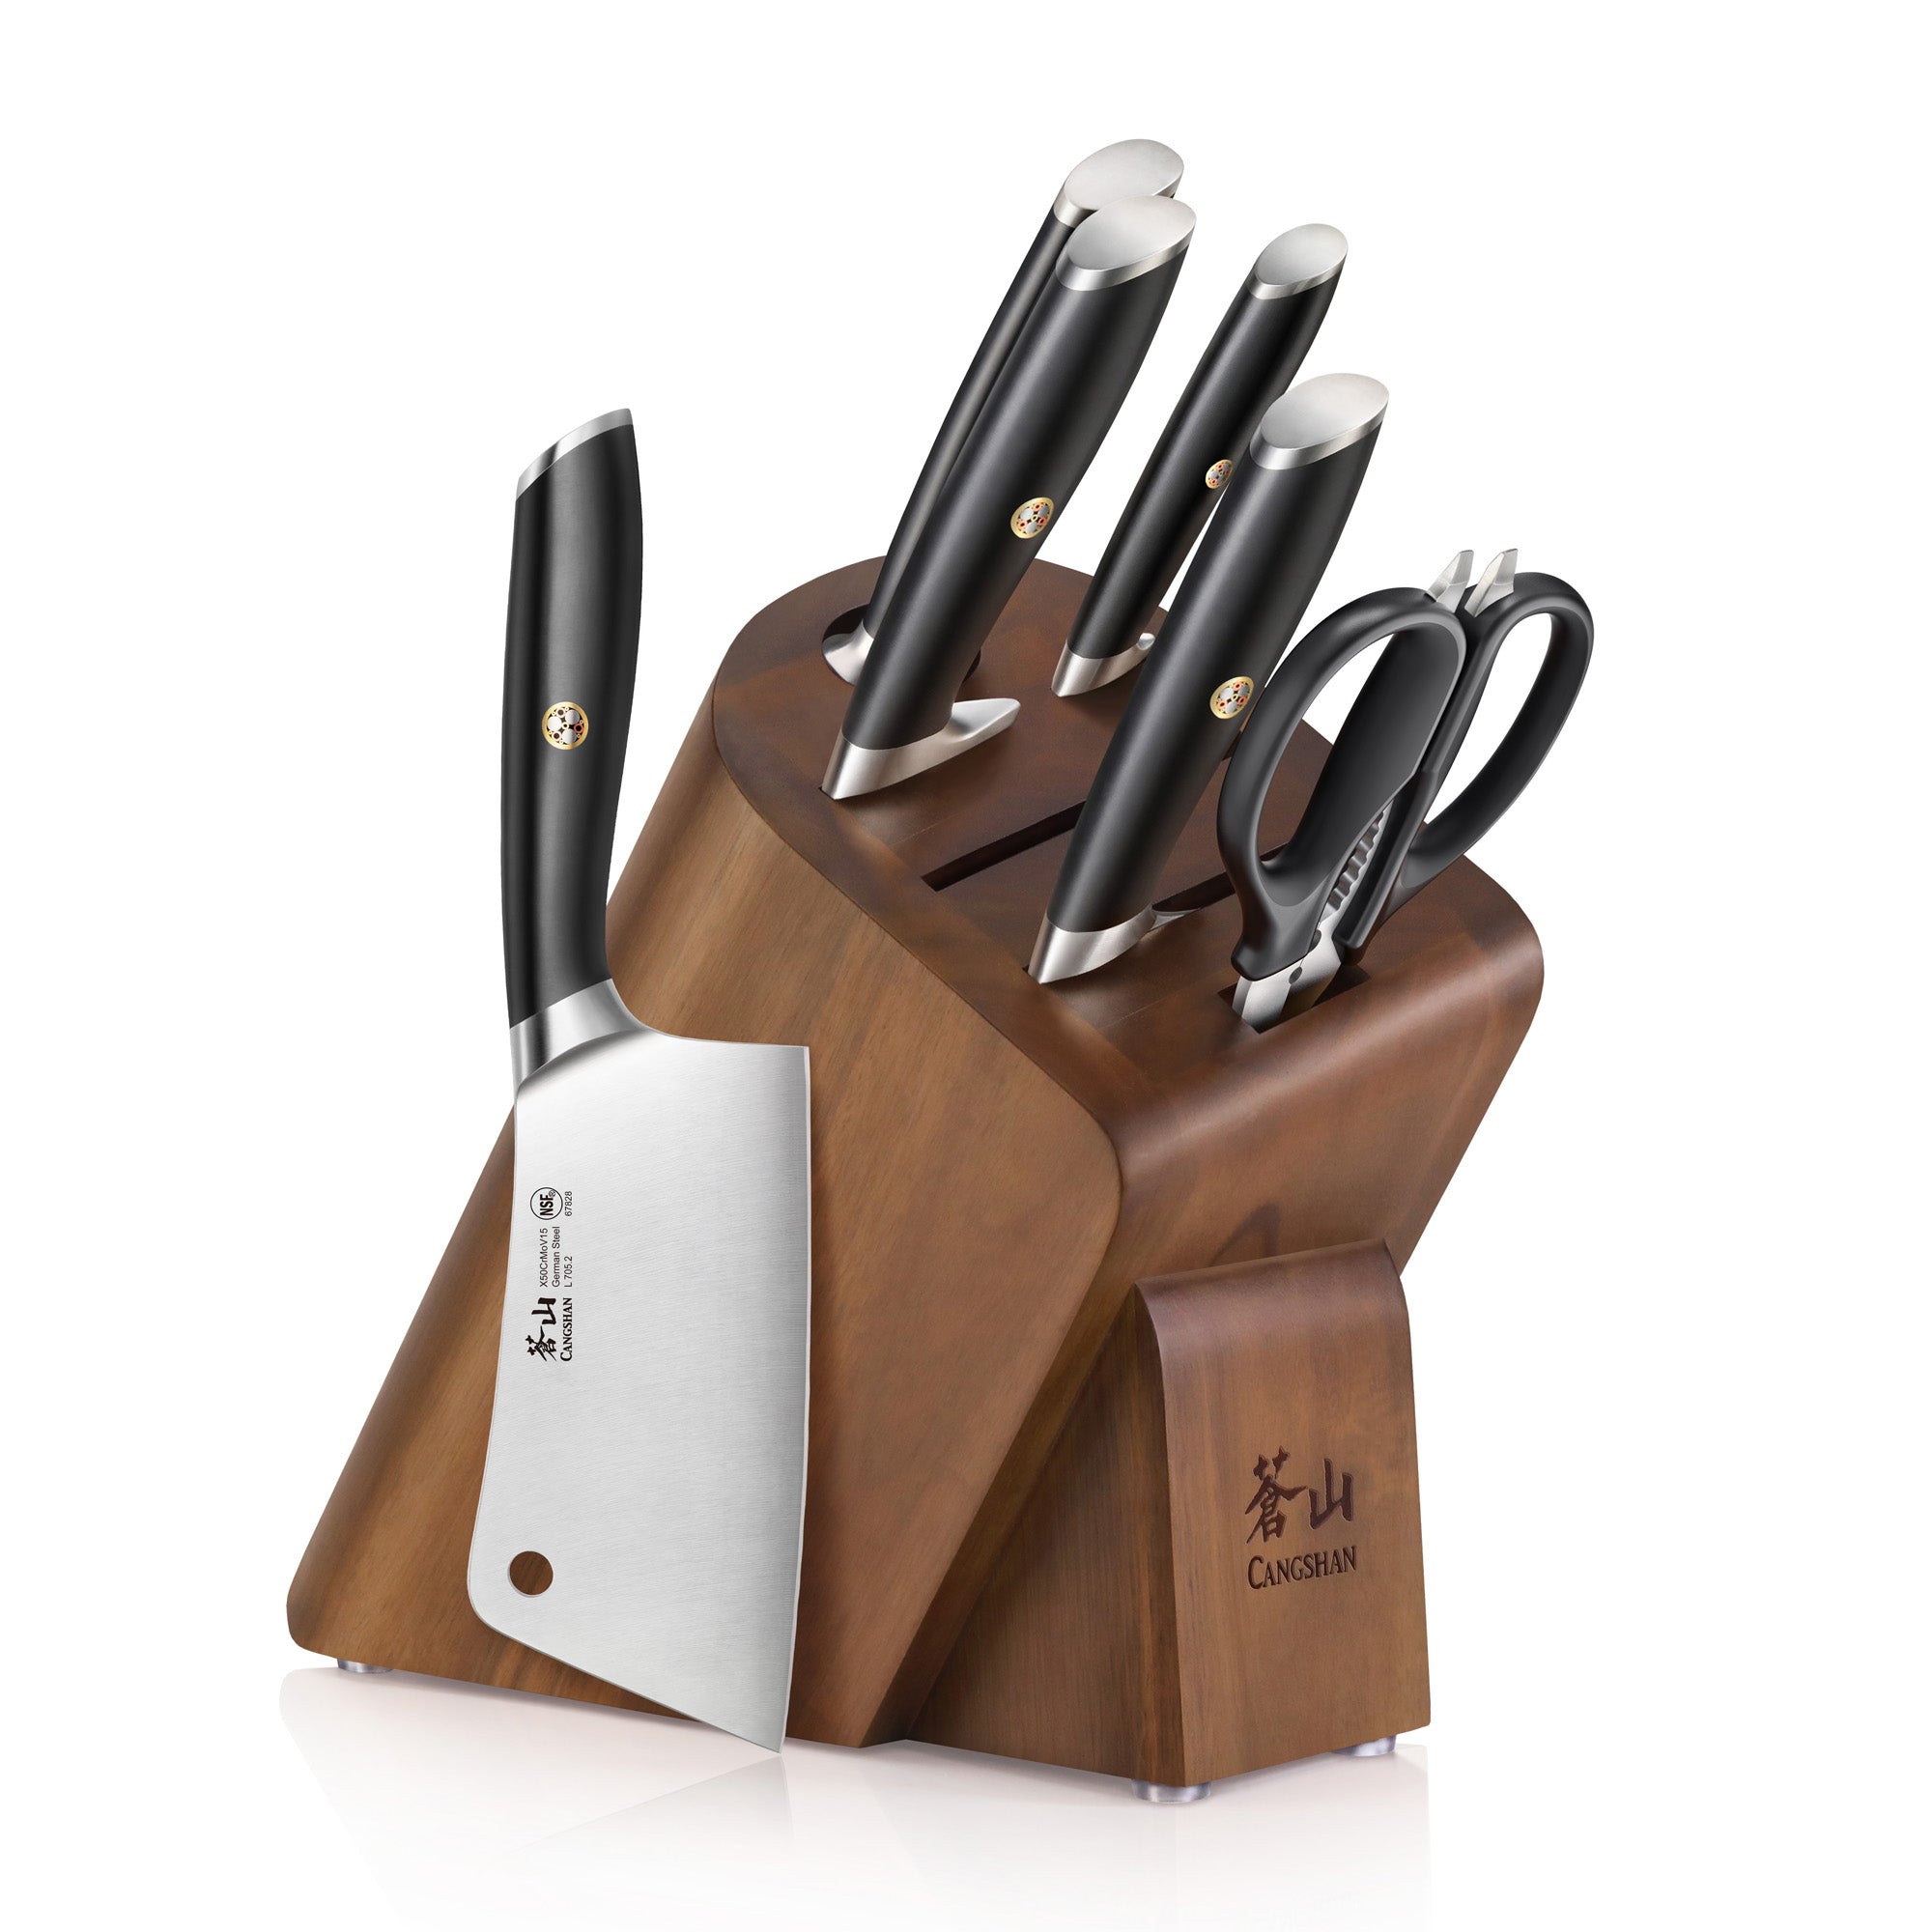 All-Clad Knife Block, Set of 7